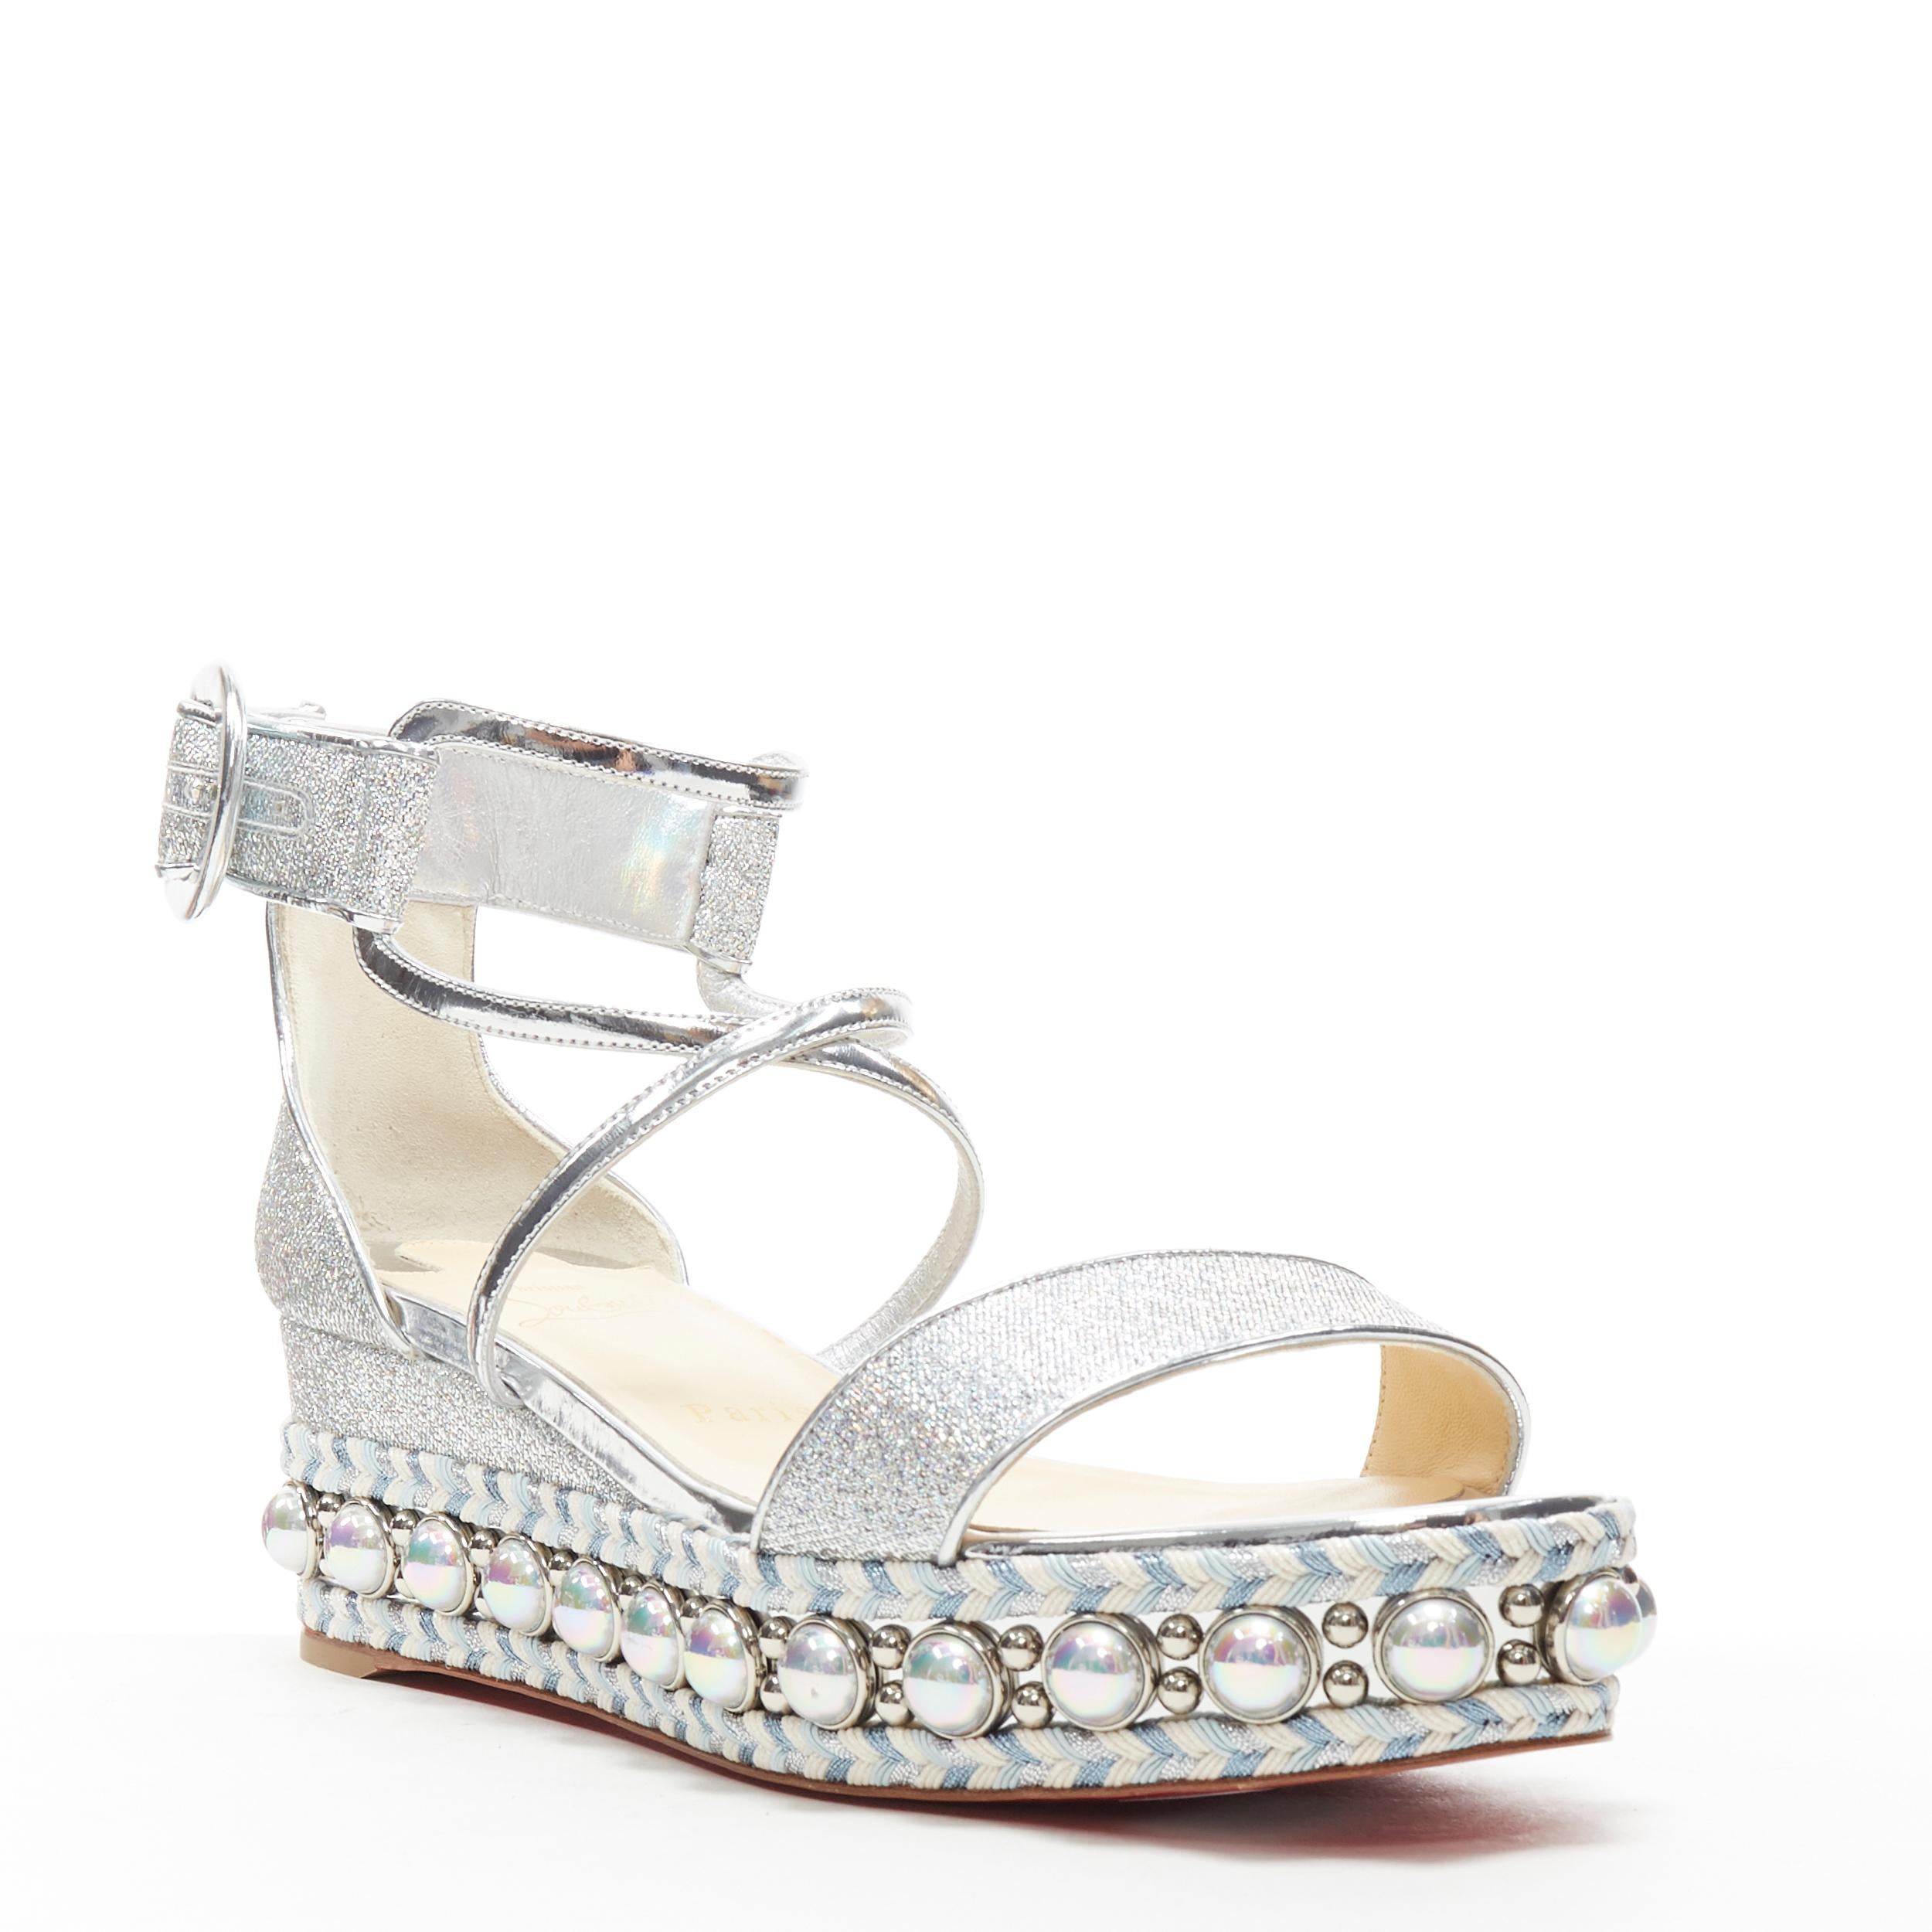 new CHRISTIAN LOUBOUTIN Chocazeppa 60 silver lurex studded platform sandals EU37
Brand: Christian Louboutin
Designer: Christian Louboutin
Model Name / Style: Chocozeppa 60
Material: Fabric
Color: Silver
Pattern: Solid
Closure: Ankle strap
Extra